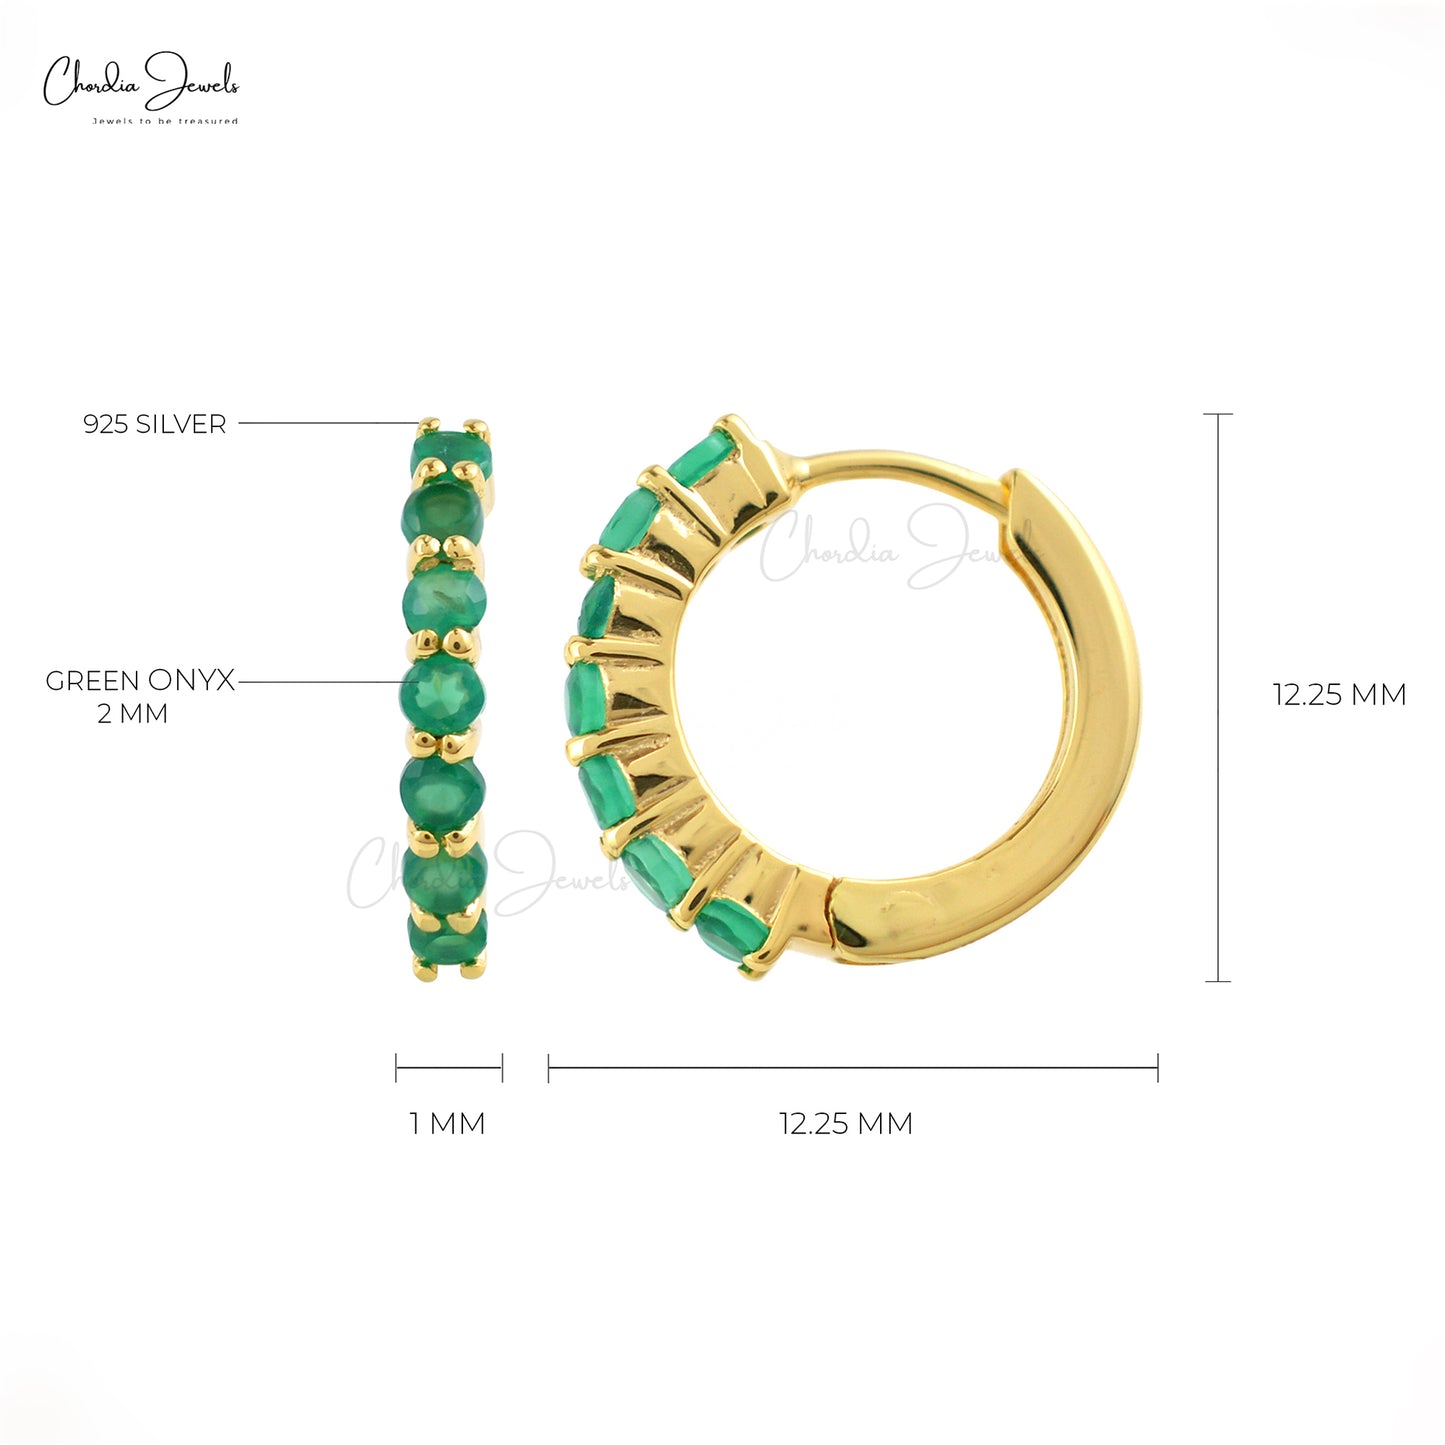 Best Quality 925 Sterling Silver Round Green Onyx Gemstone Hoop Earrings From Top Wholesaler At Factory Price